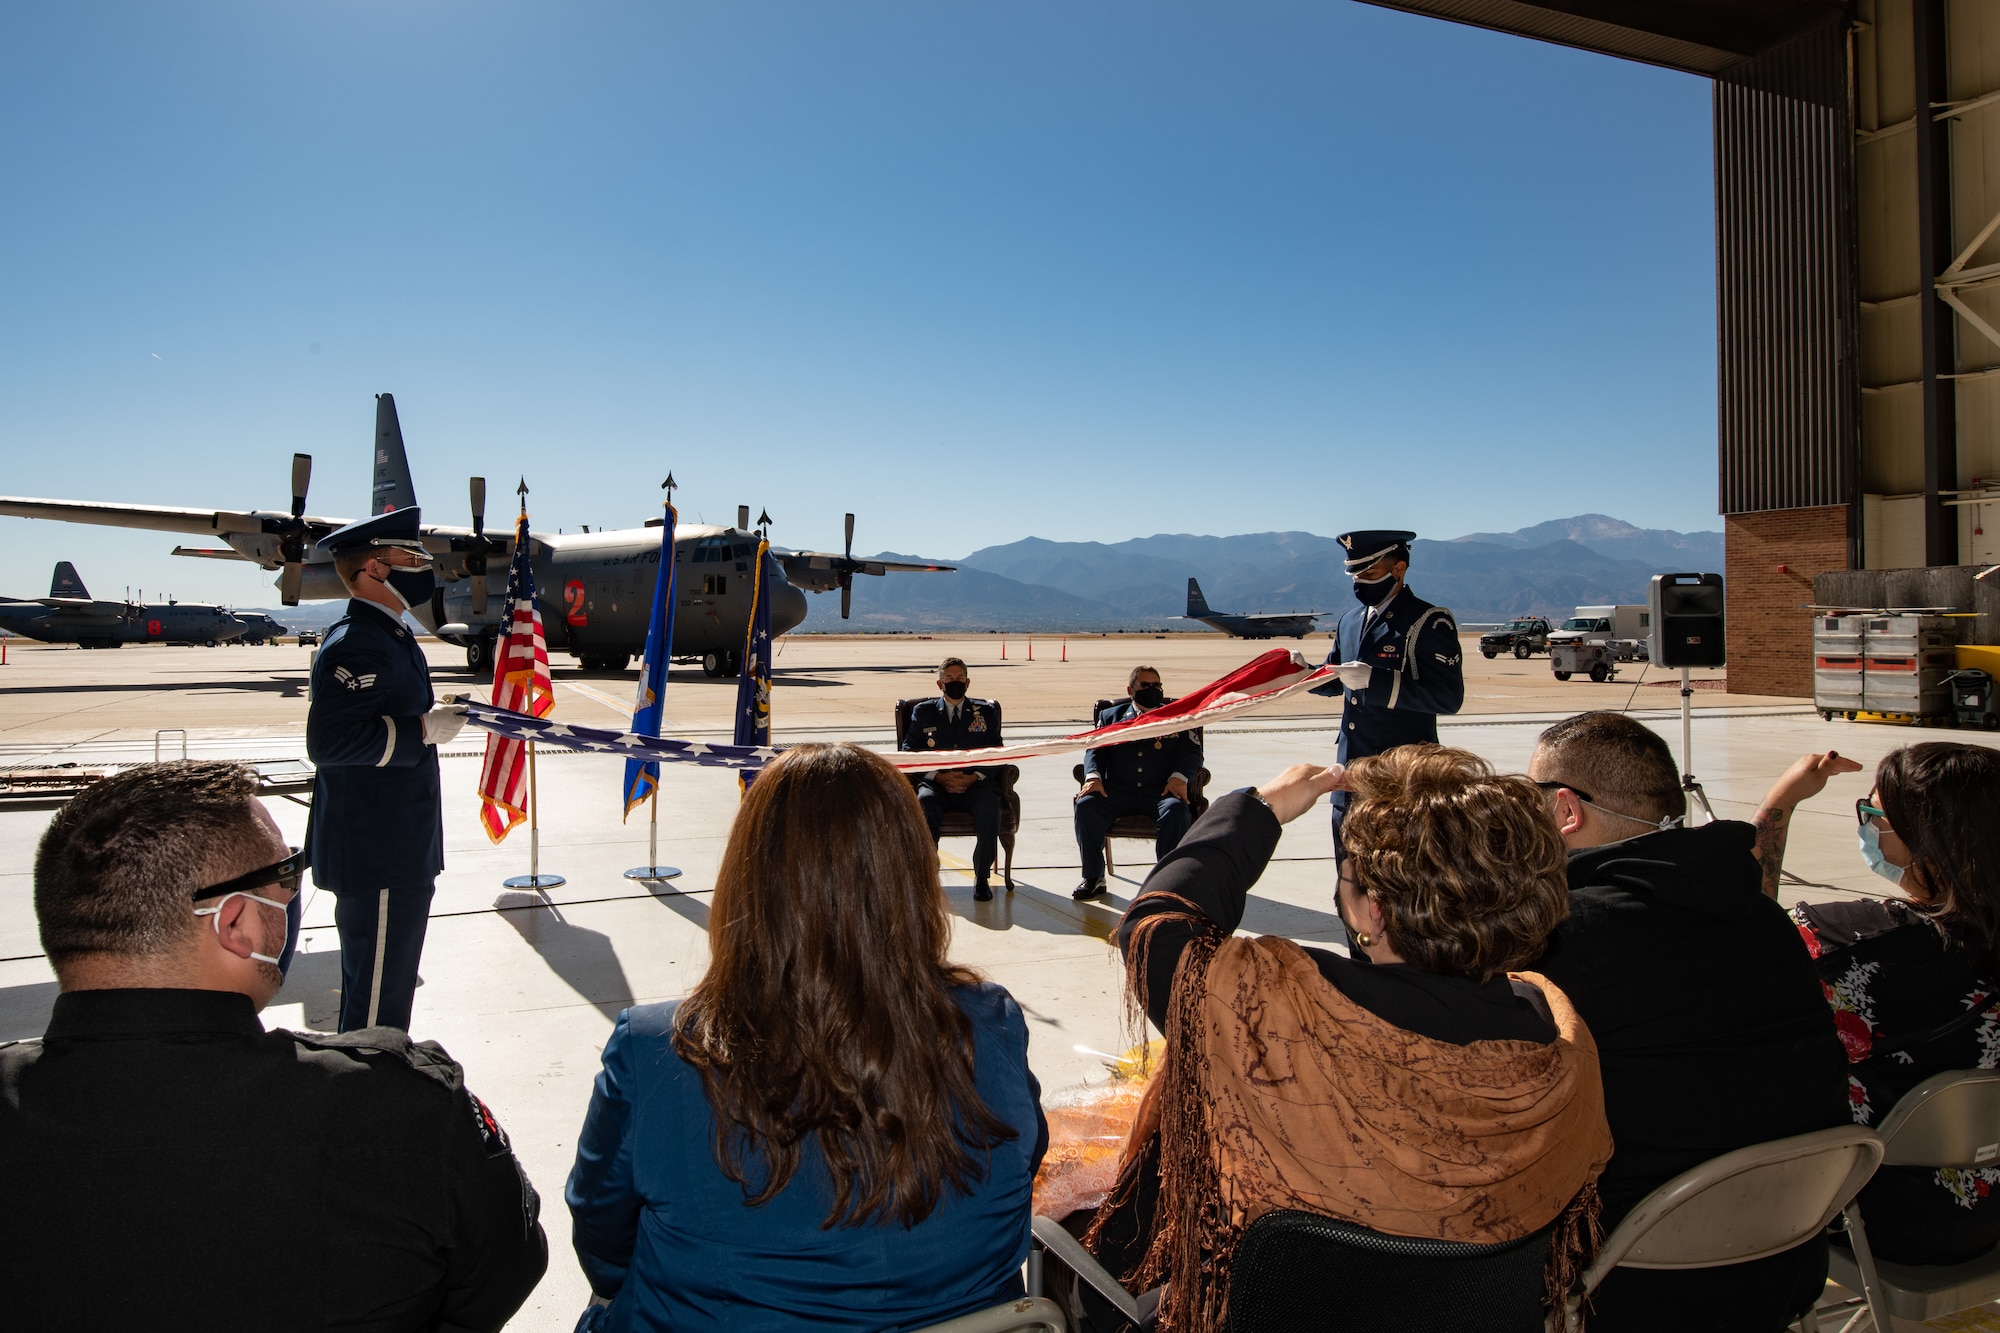 Two Airmen in service dress unfold an American flag in front of two men in Air Force service dress with two C-130s on a parking ramp behind them and a mountain range in the background.